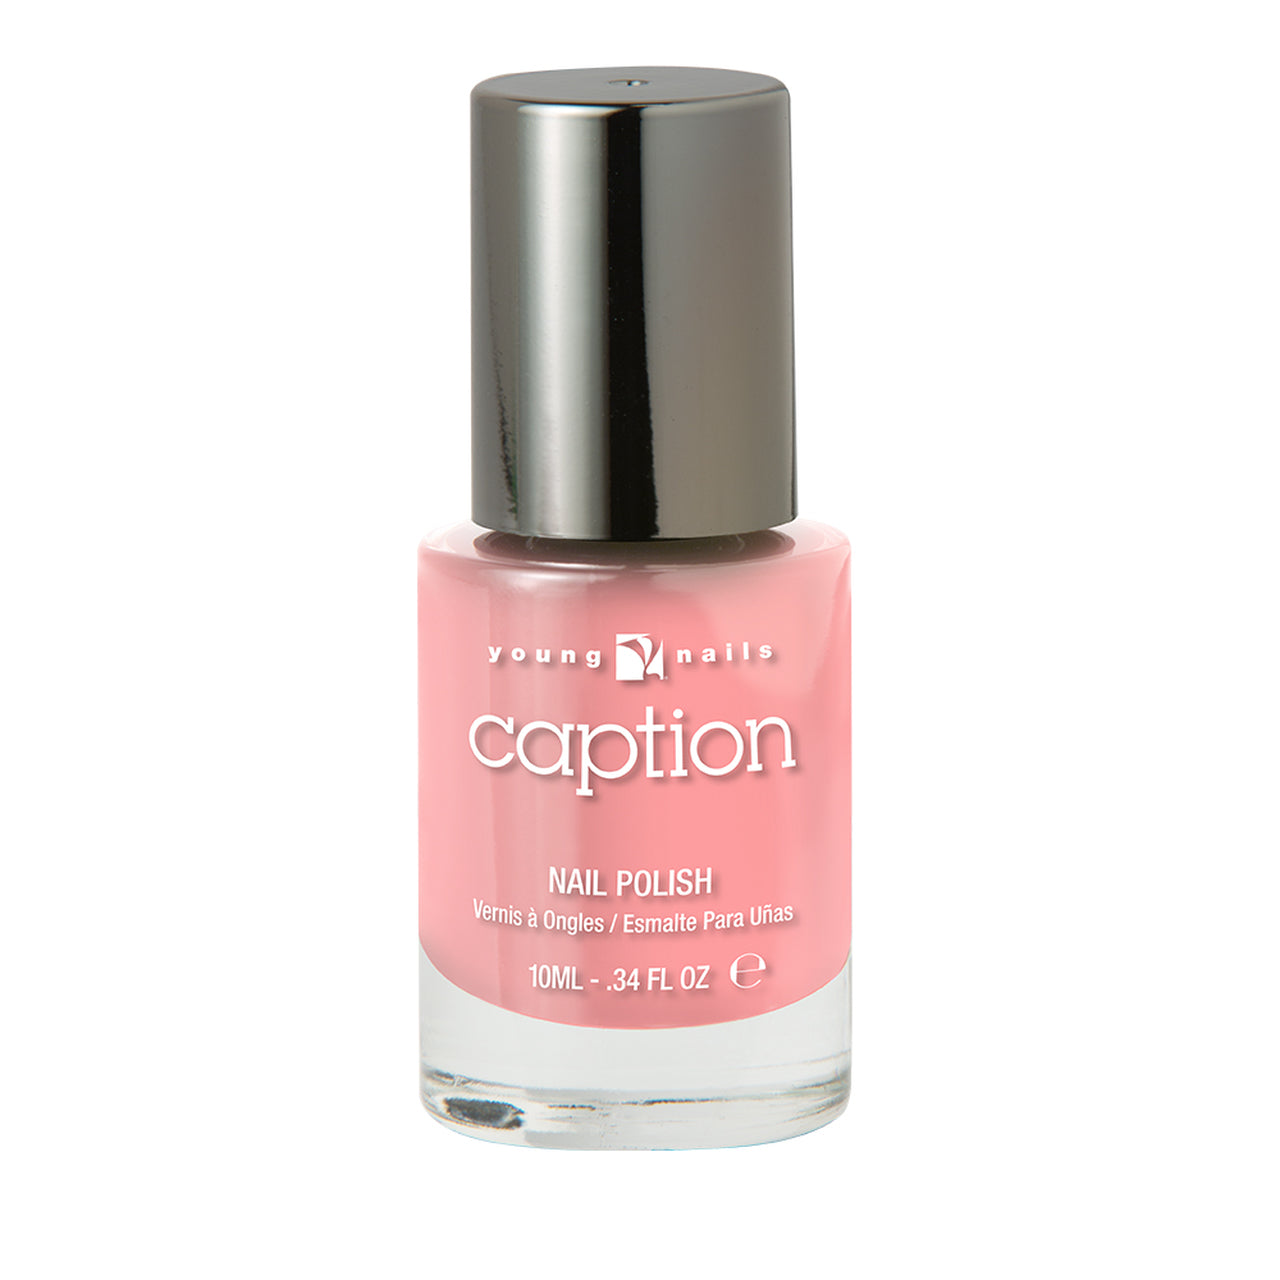 YOUNG NAILS CAPTION NAIL POLISH PERFECTS NOT IN MY VOCAB .5oz